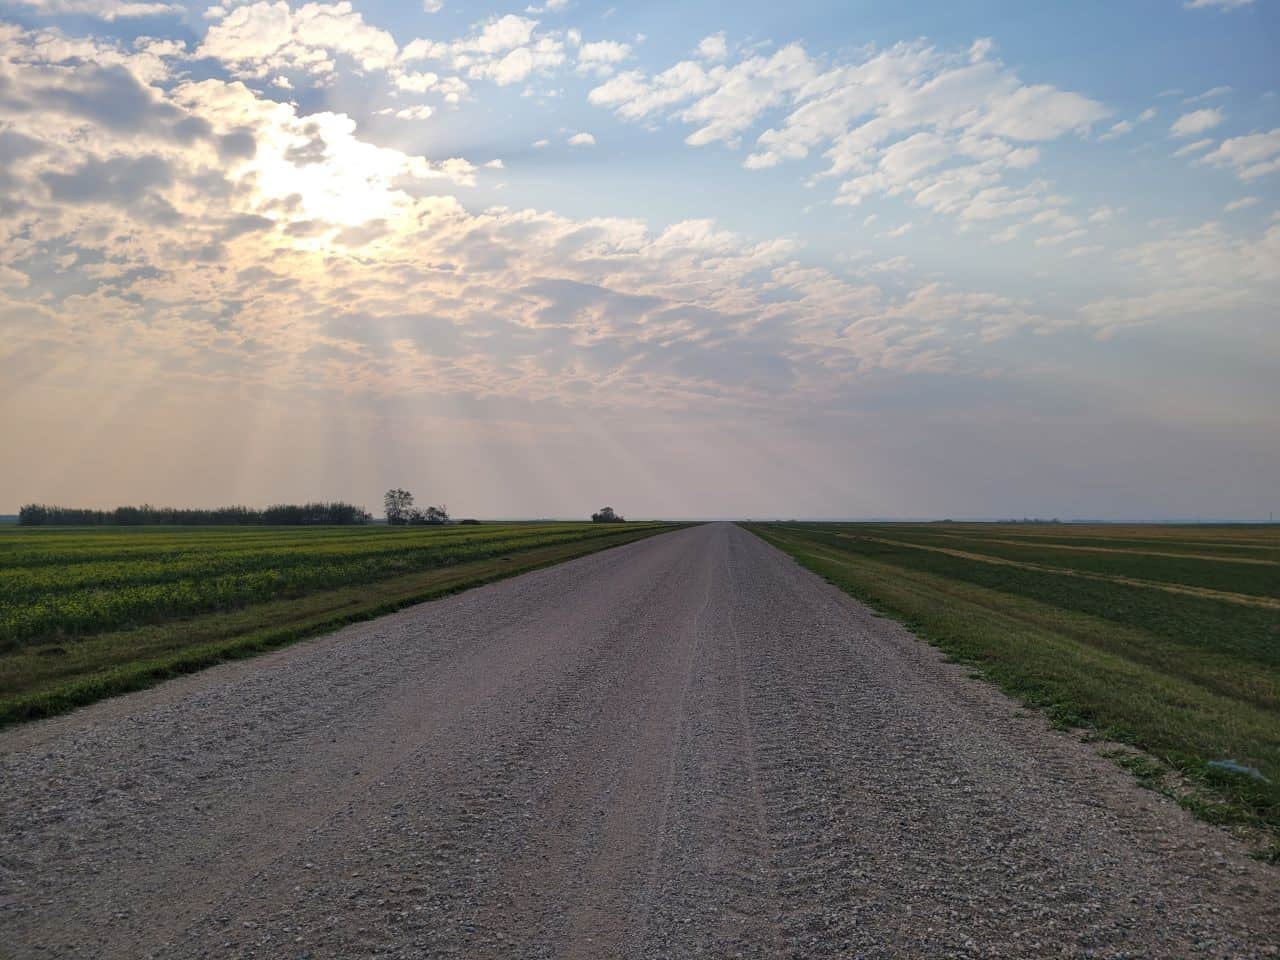 The wide open landscape of the Northern Trails of Saskatchewan portion of the Trans Canada Trail features stunning sunrises, sunsets, and endless skies.